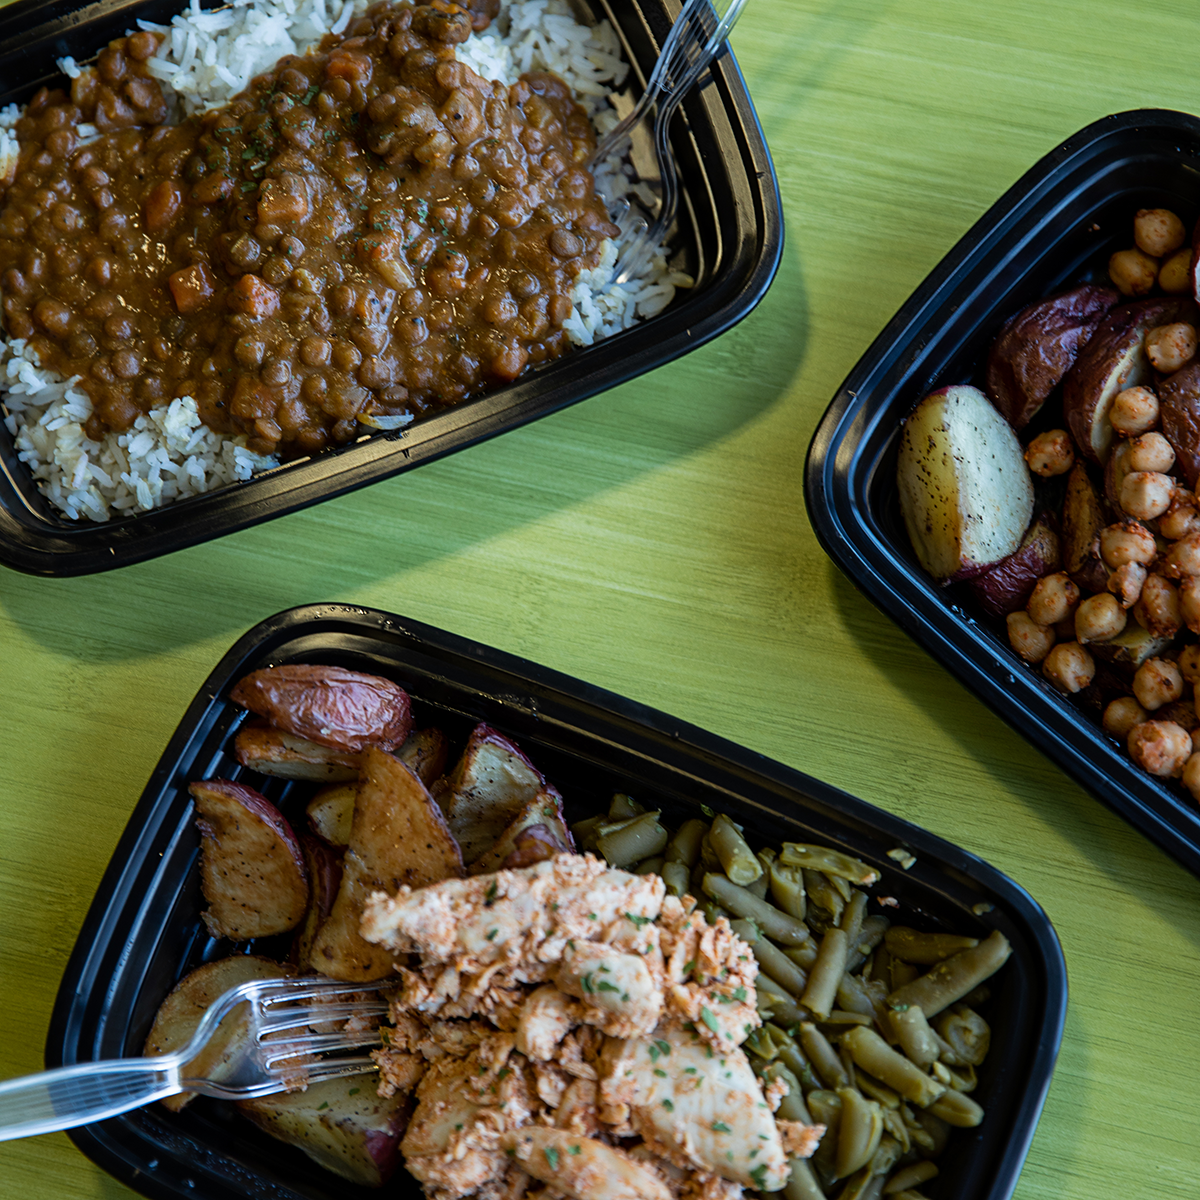 A to-go dish of beans and rice